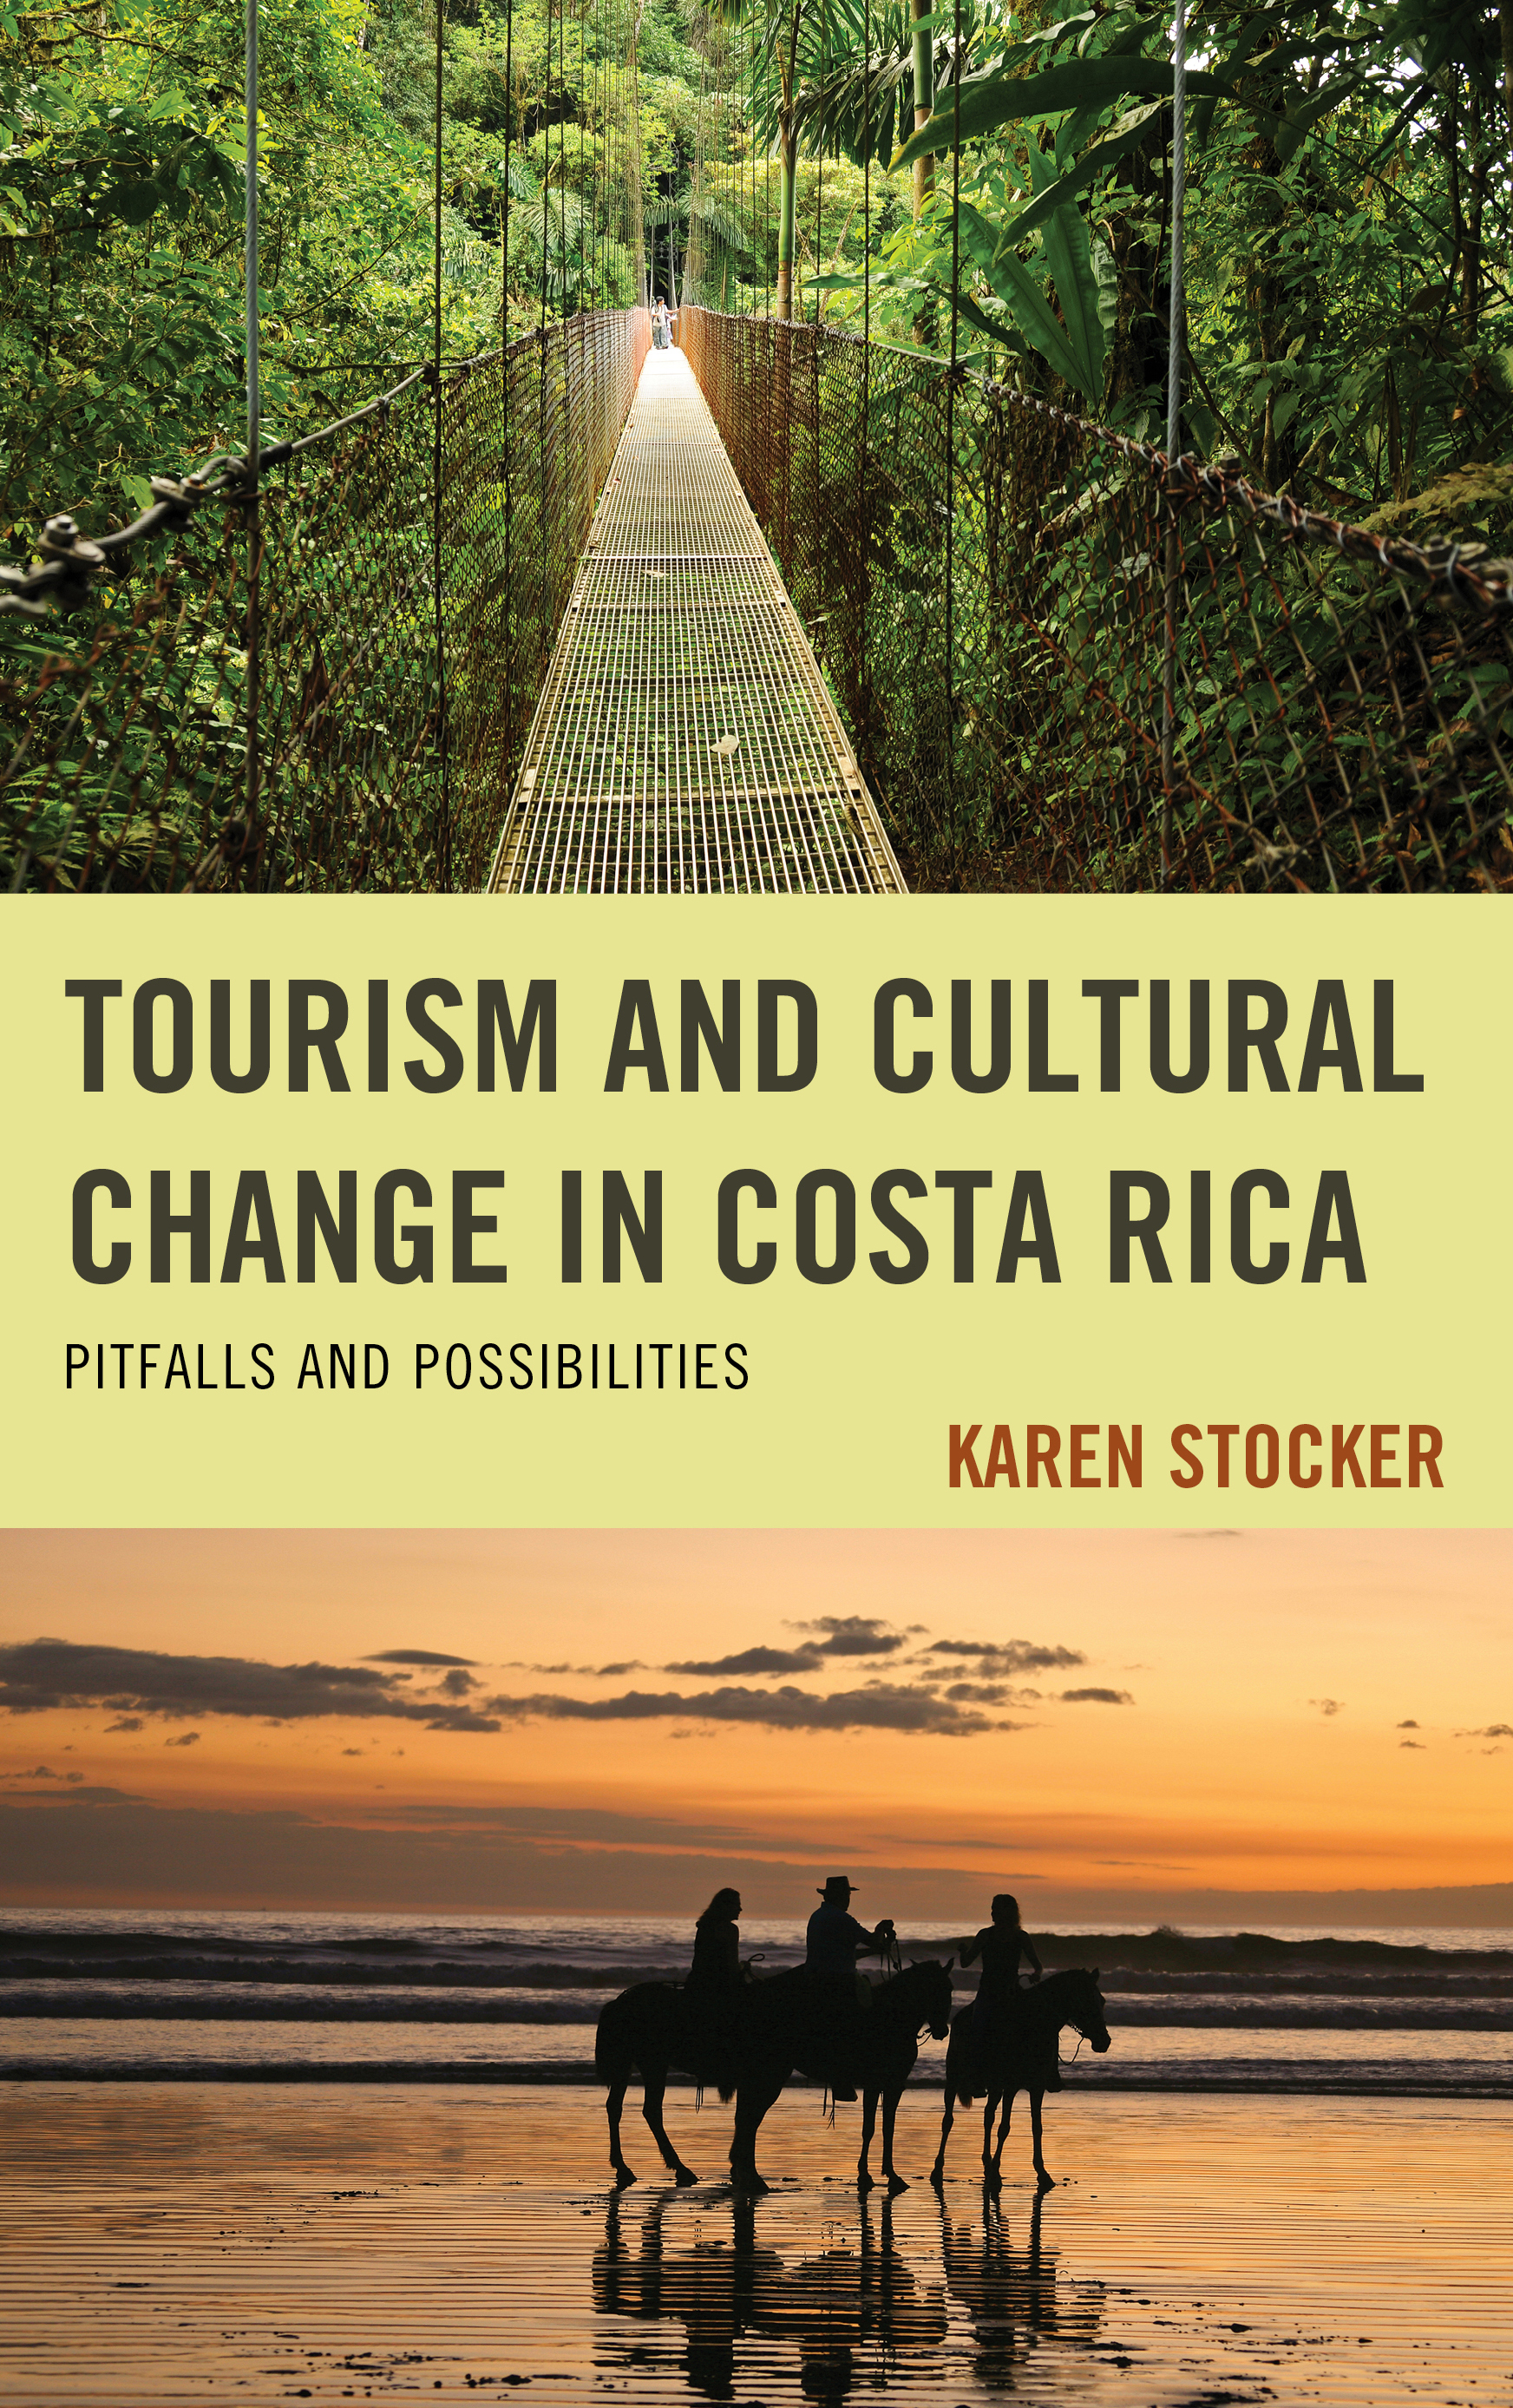 Tourism and Cultural Change in Costa Rica: Pitfalls and Possibilities